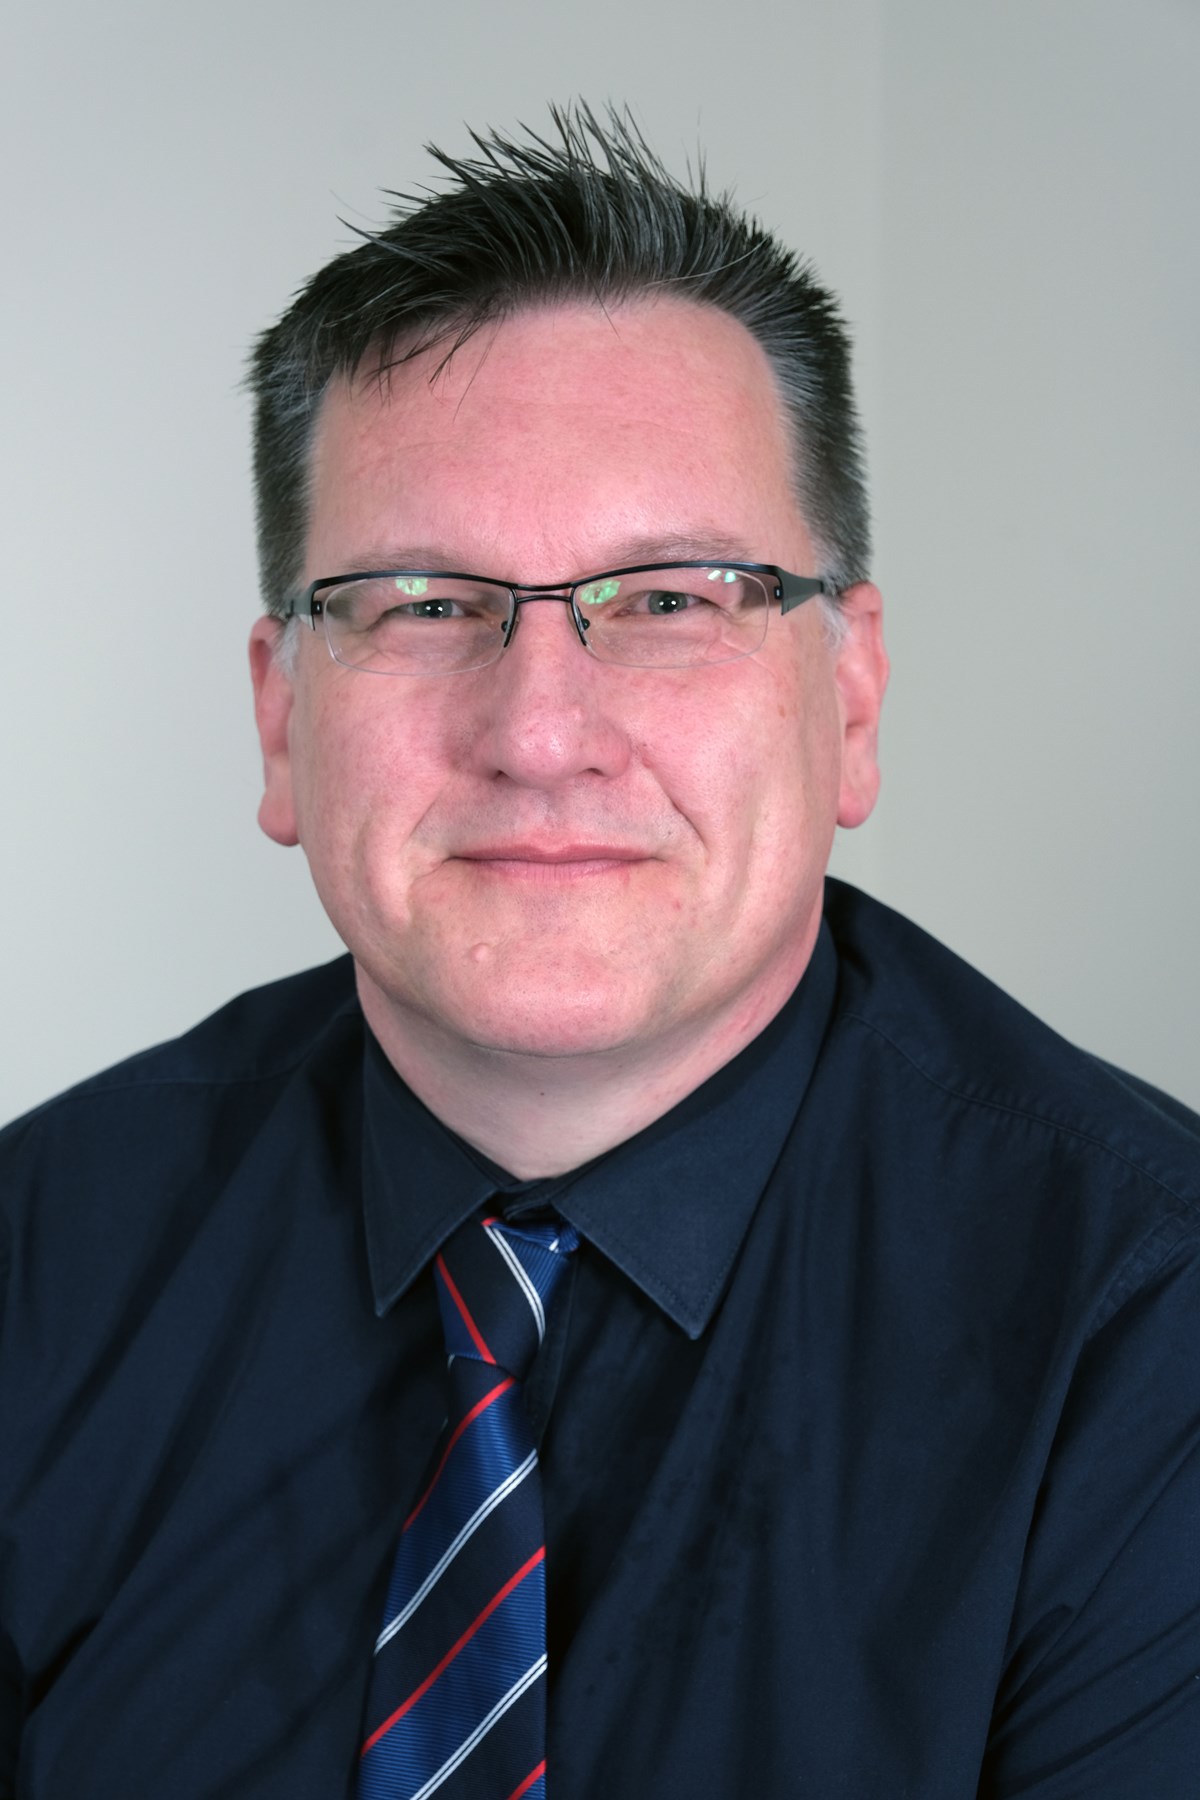 Cllr Guy Woodham, Cabinet Member for Education and Welsh Language